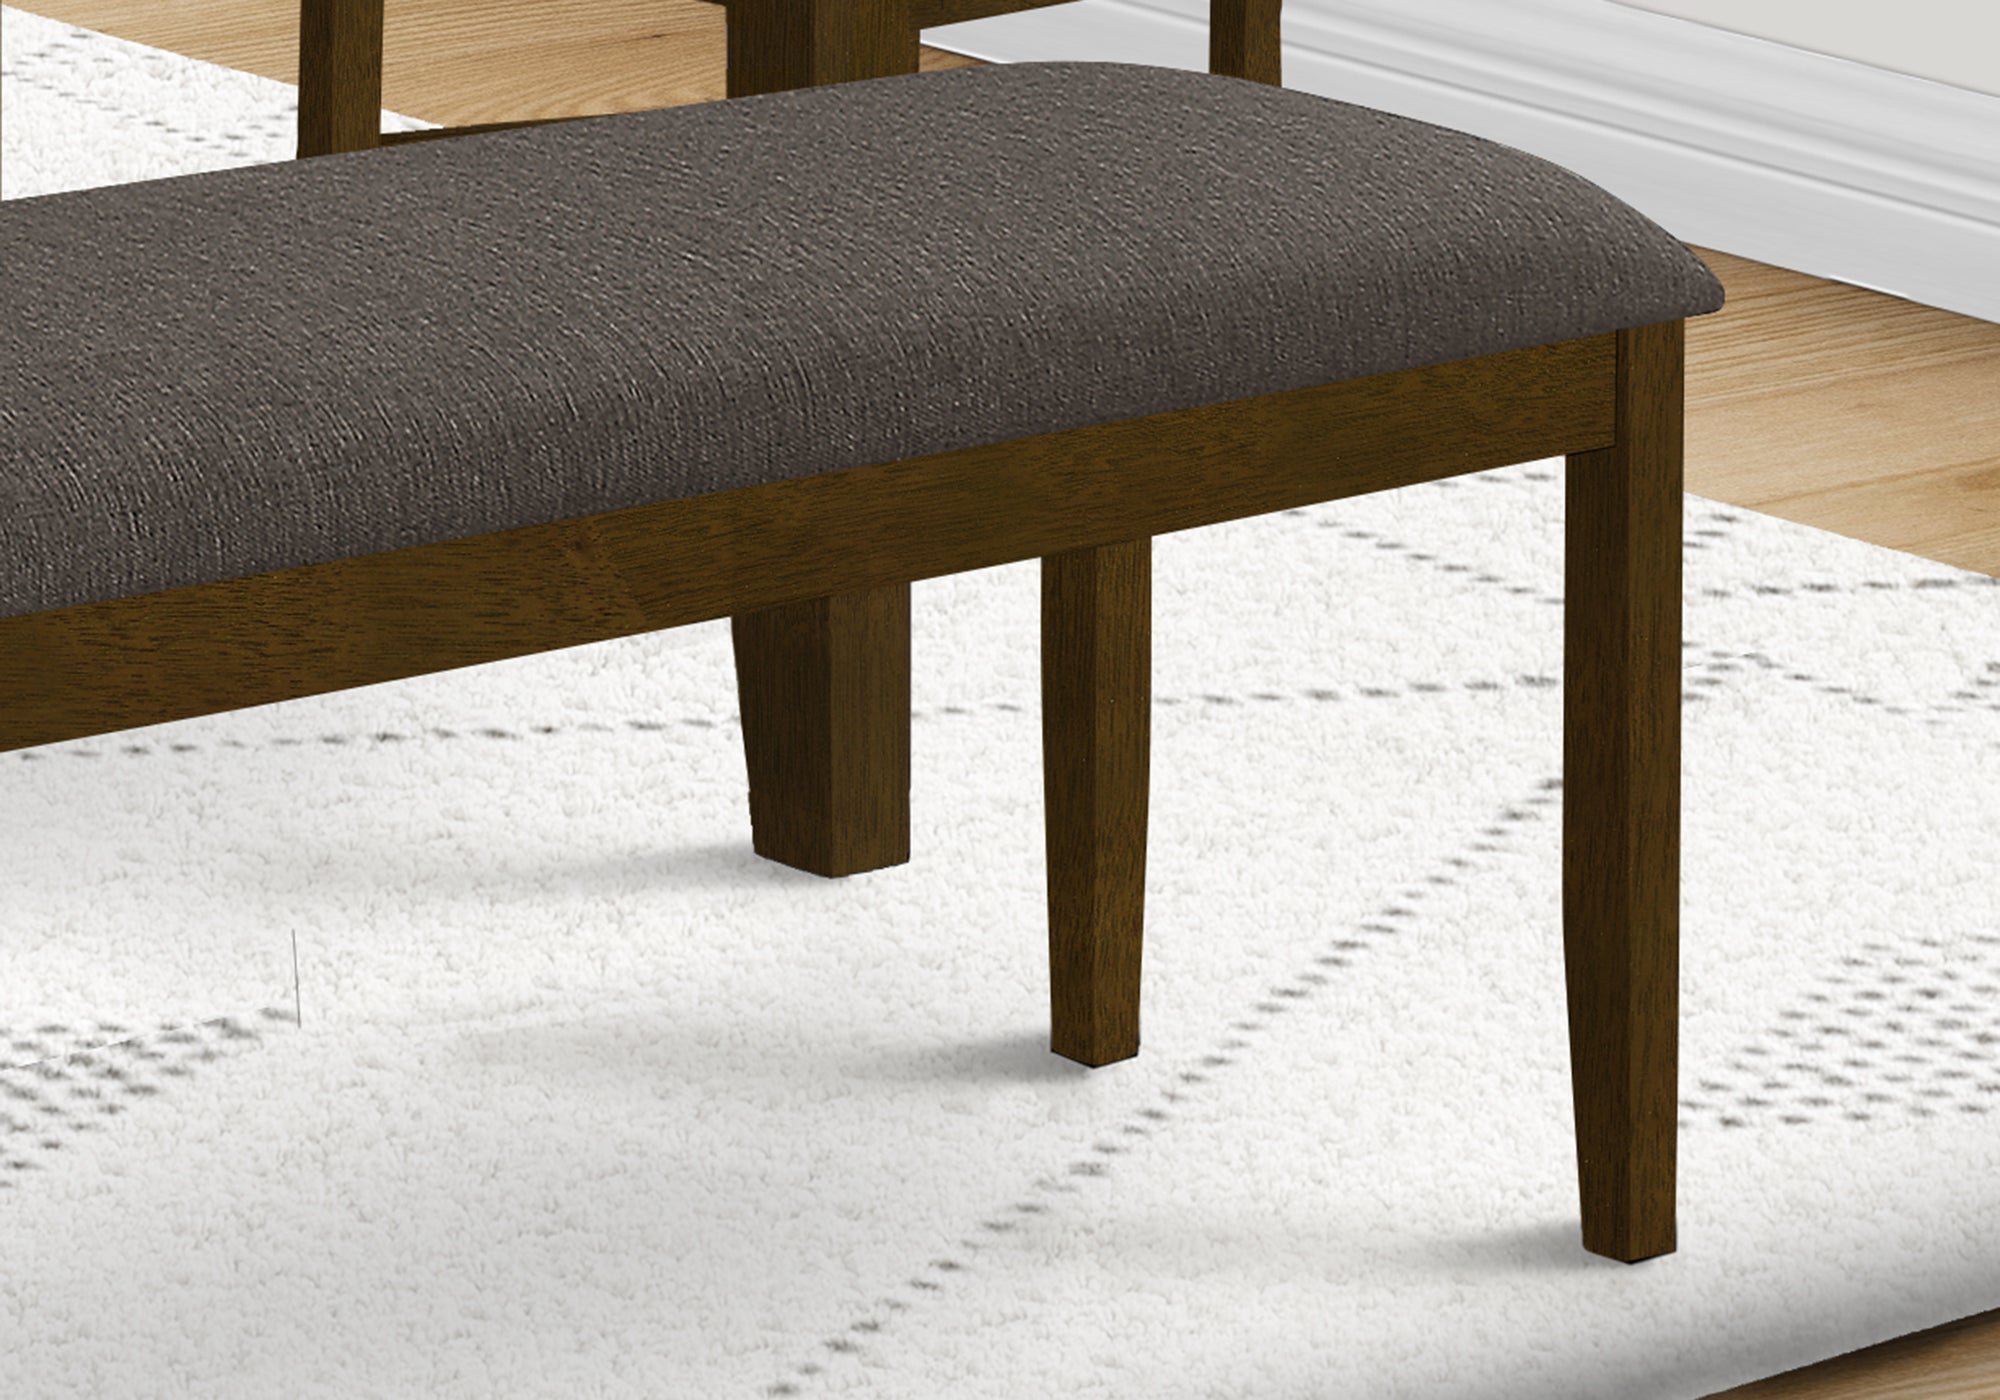 MN-451397    Bench, 44" Rectangular, Upholstered, Wood, Dining Room, Kitchen, Entryway, Brown Solid Wood, Brown Fabric, Transitional